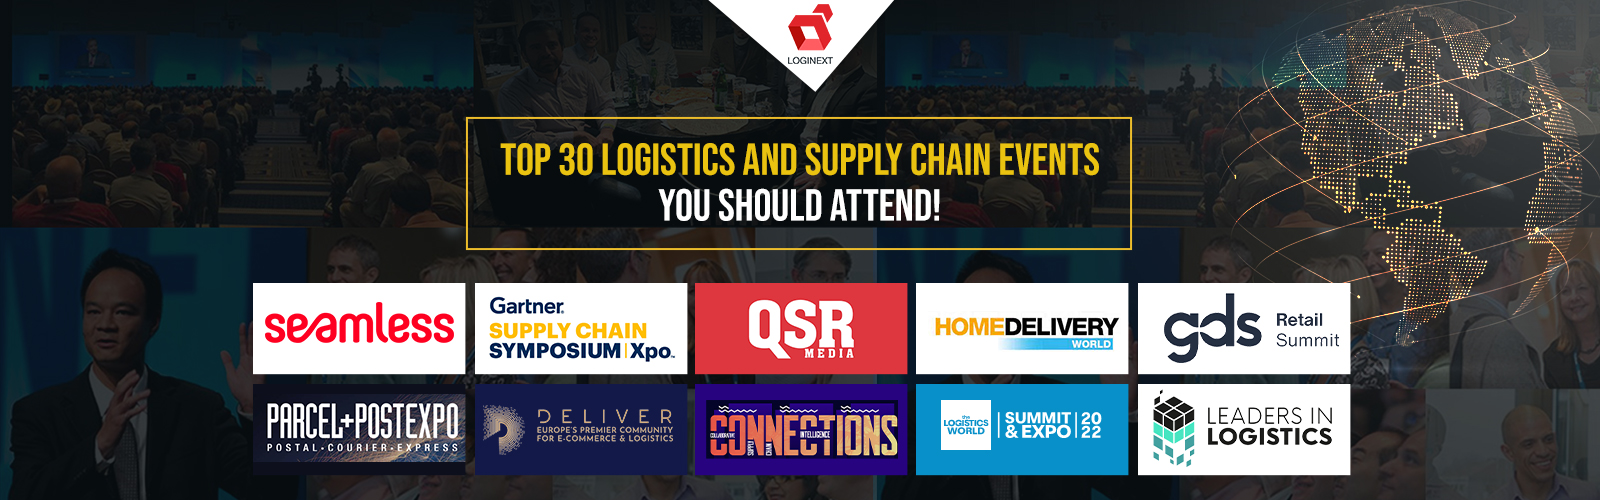 Top 30 Logistics and Supply Chain Events You Should Attend!